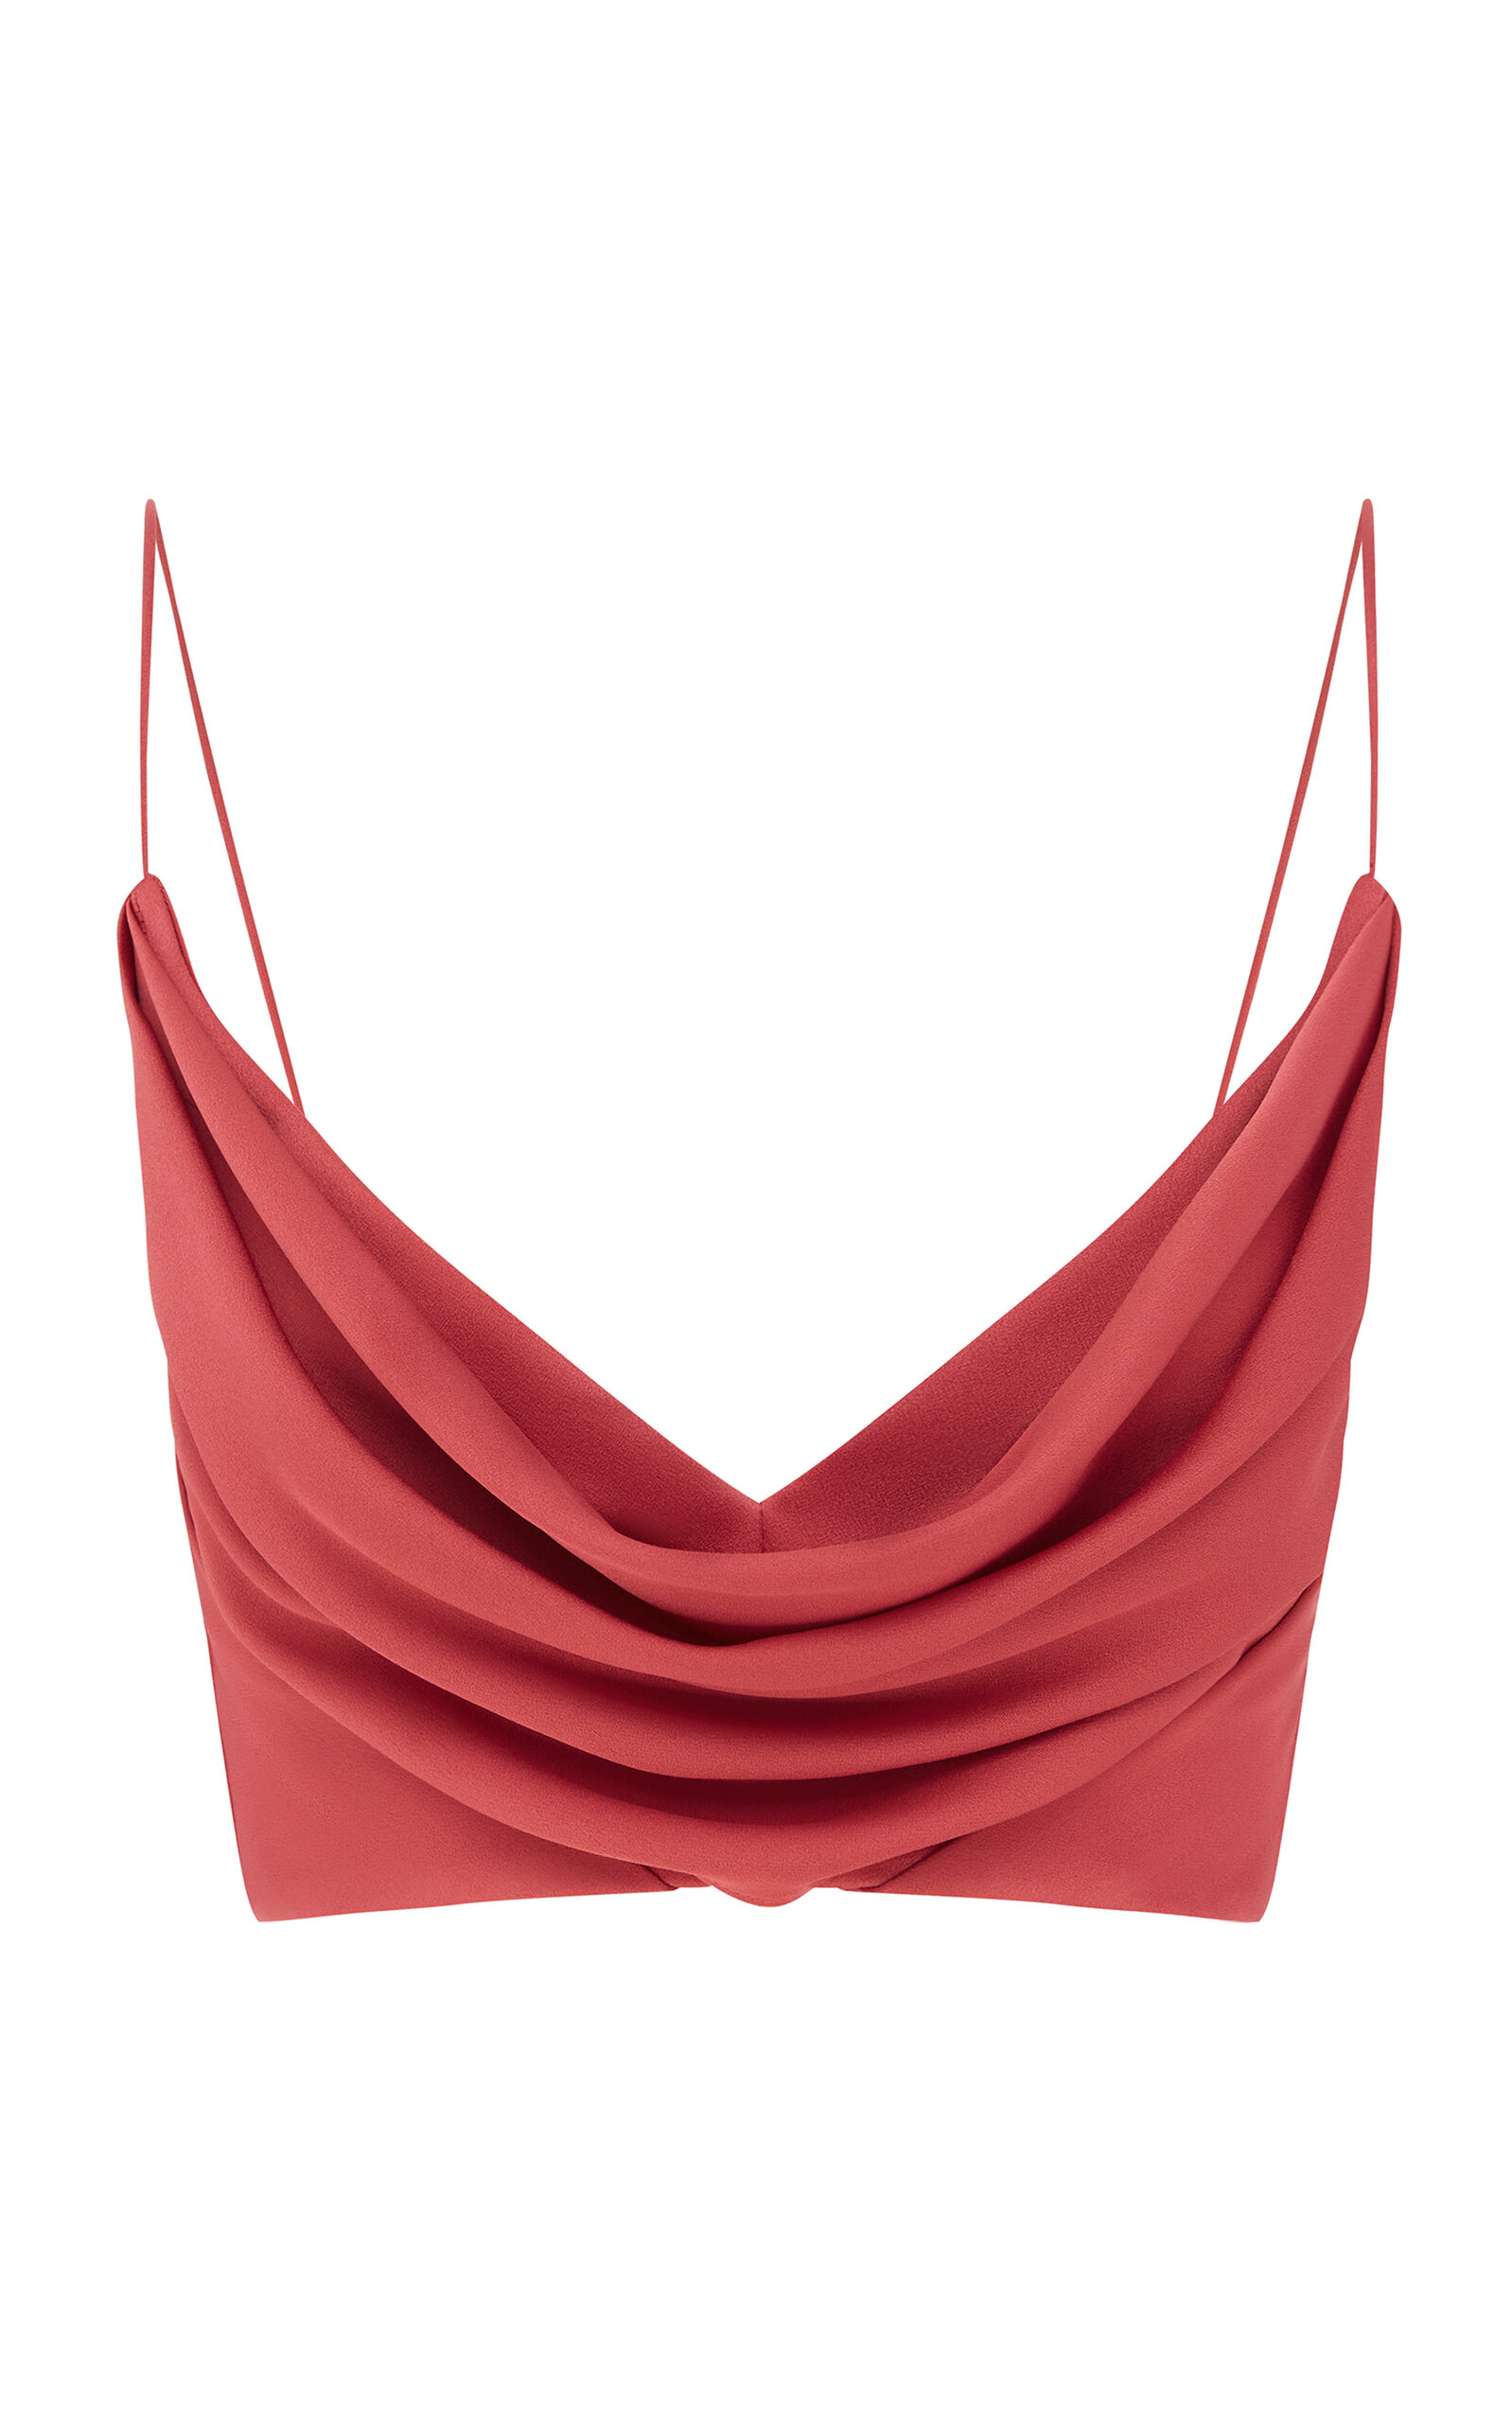 Alex Perry Draped Satin Crepe Crop Top In Pink